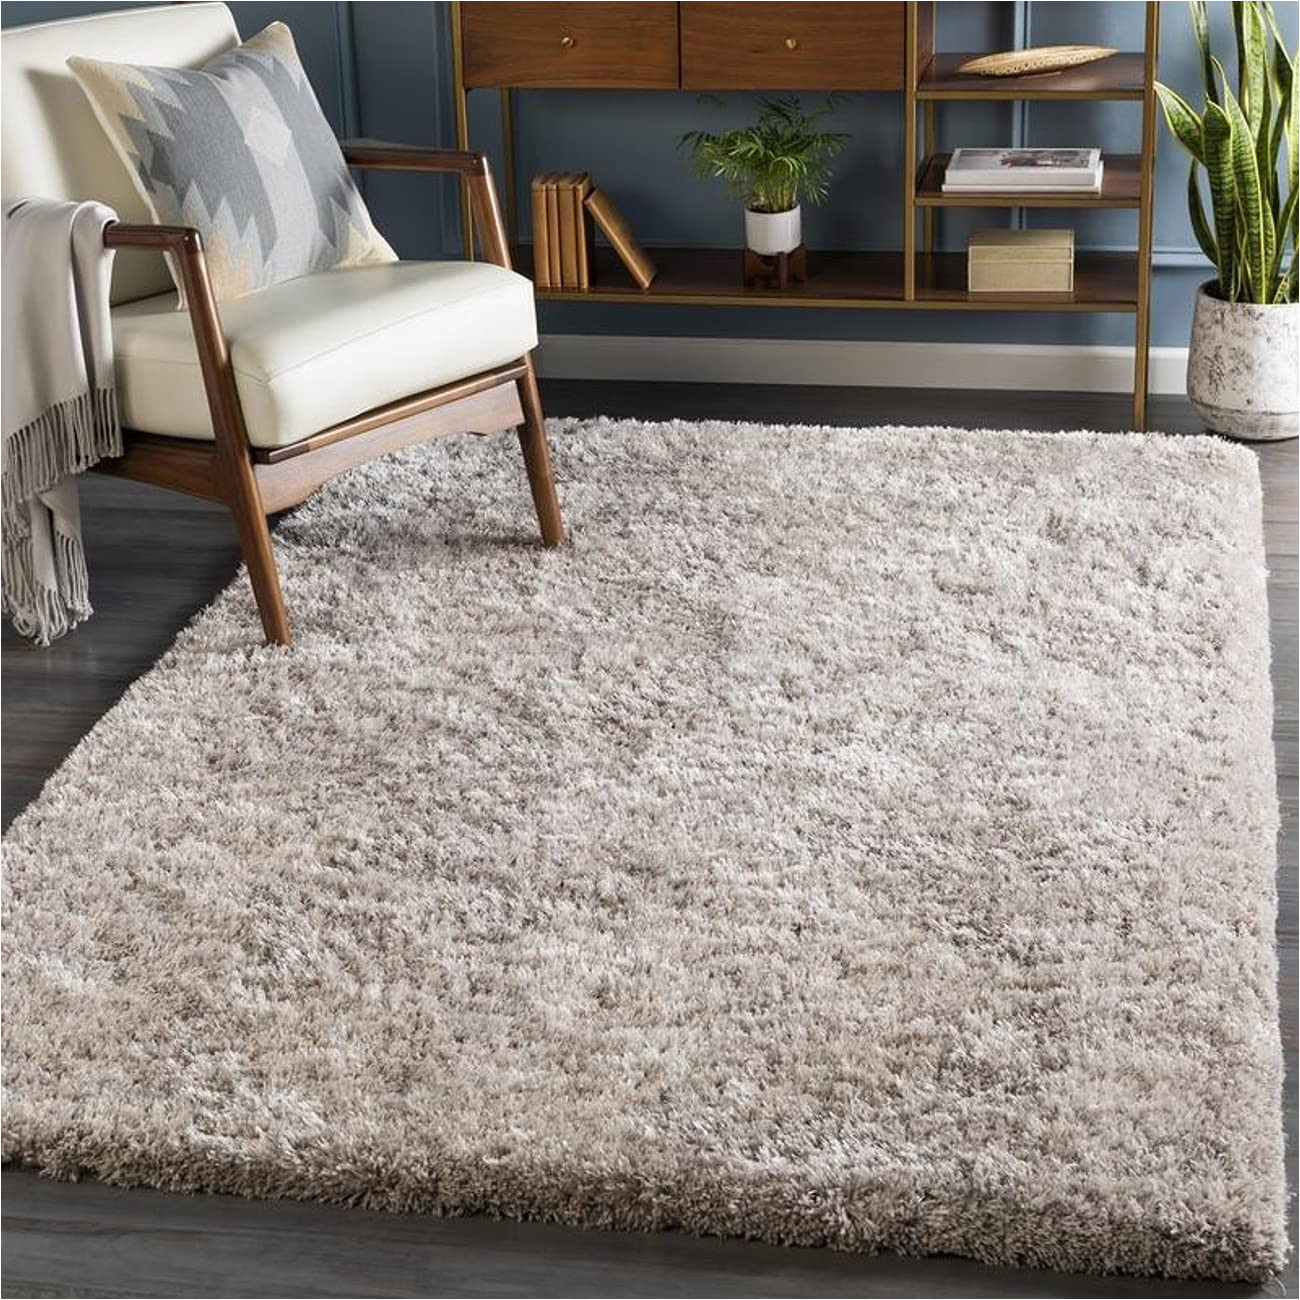 10 X 14 area Rugs Cheap Mark&day area Rugs, 10×14 Cambrai Shag Light Gray area Rug, Gray / Beige / White Carpet for Living Room, Bedroom or Kitchen (10′ X 14′)